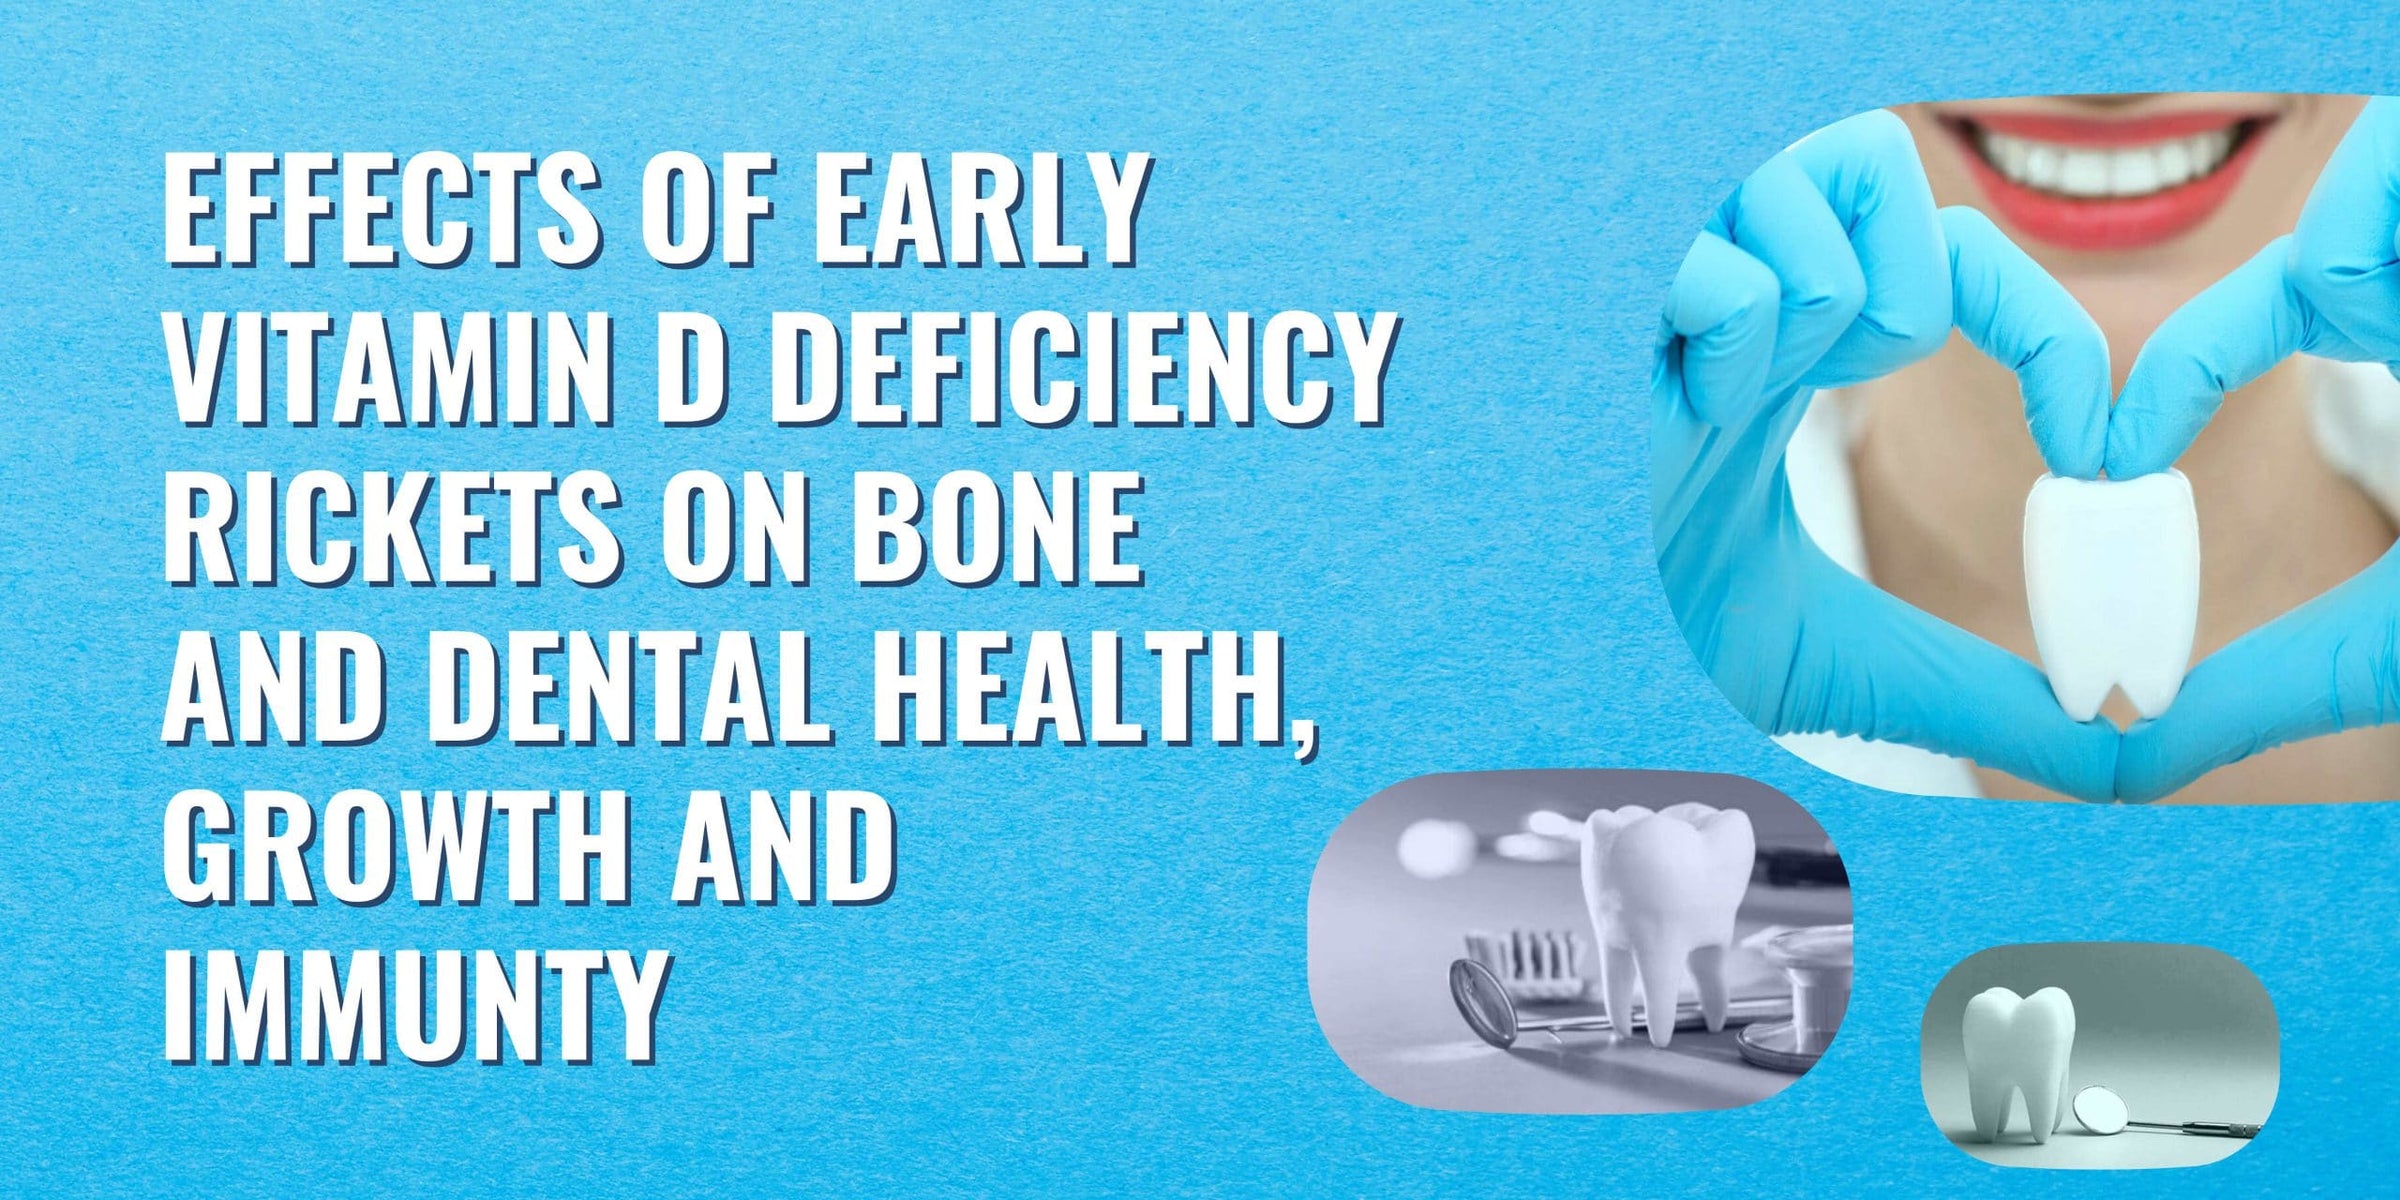 Effects of early vitamin D deficiency rickets on bone and dental health, growth and immunity Image